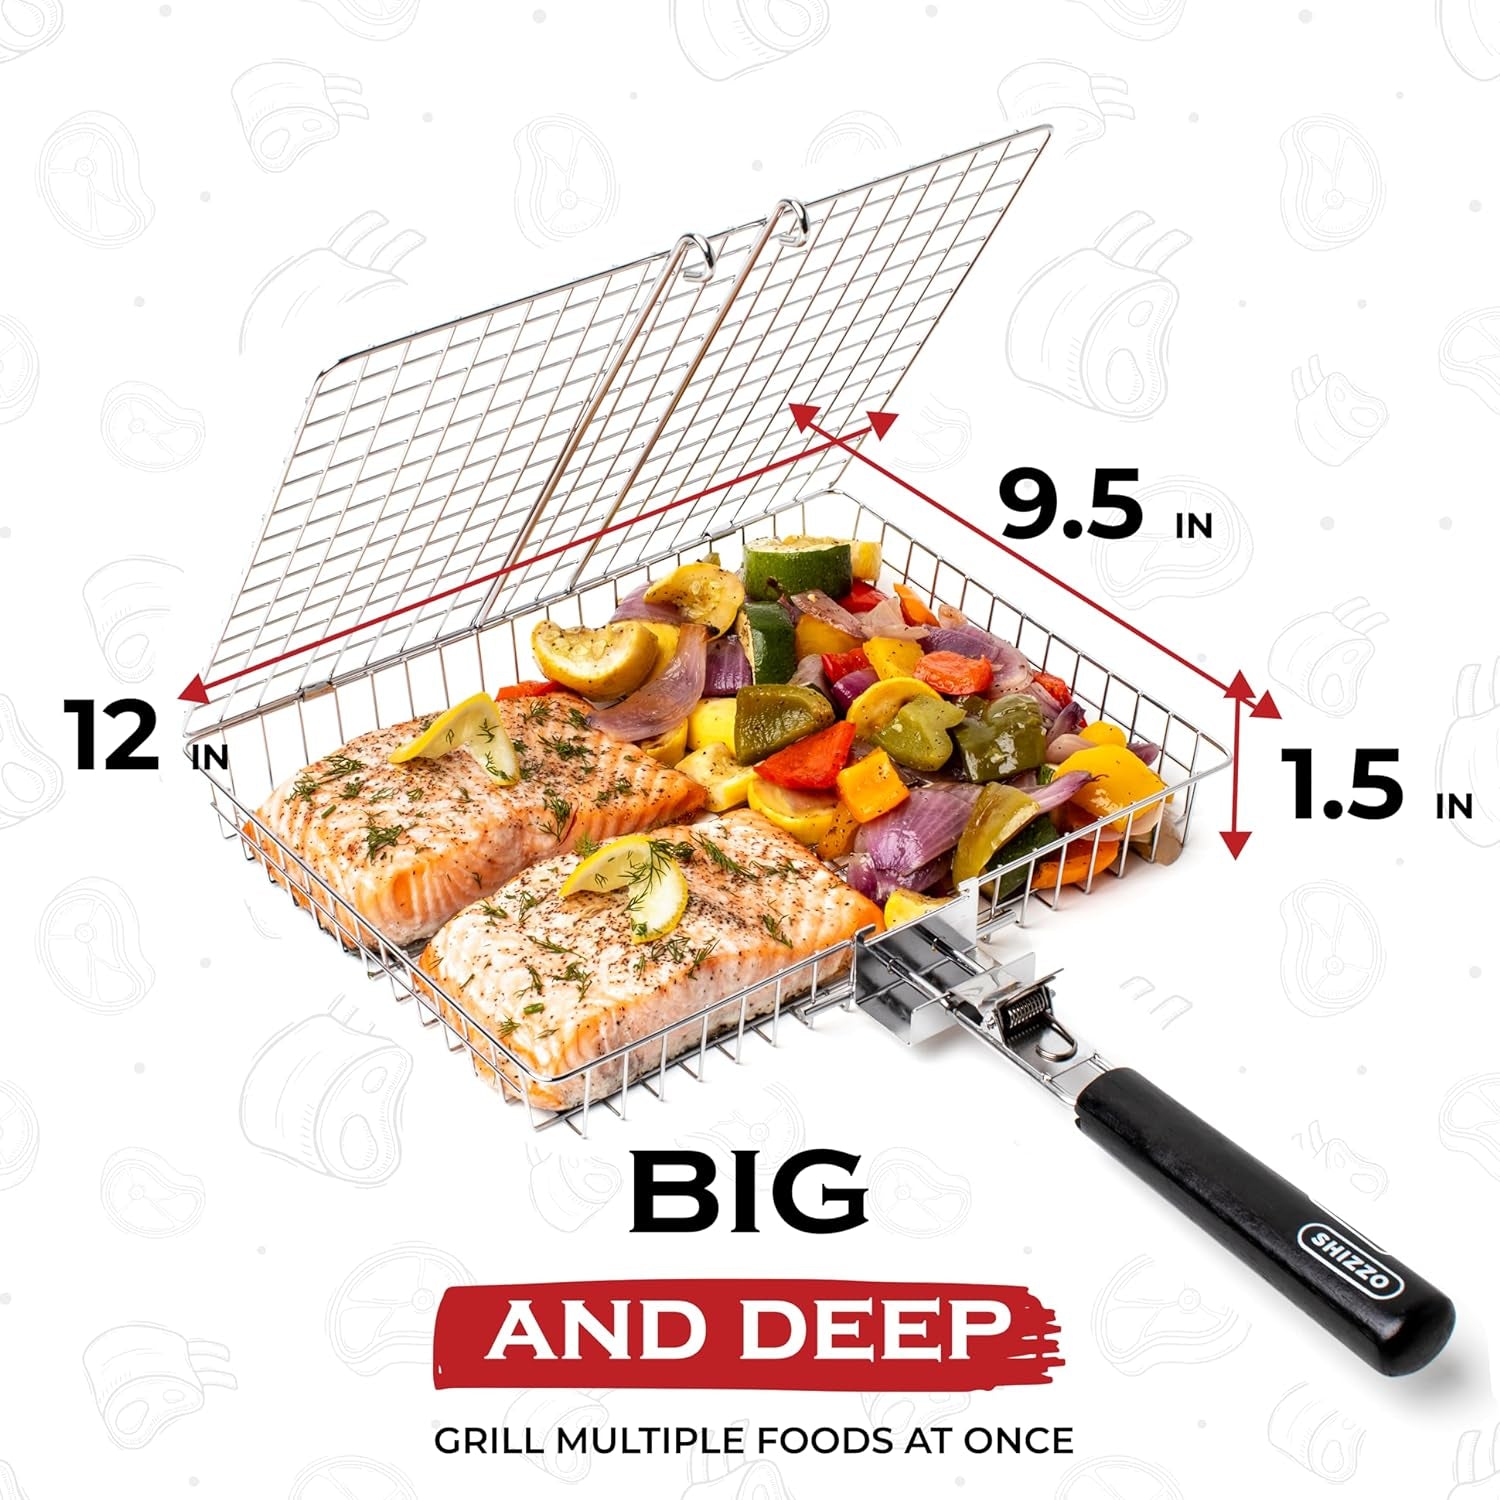 Grill Basket, Barbecue BBQ Grilling Basket , Stainless Steel Large Folding Grilling Baskets with Handle, Portable Outdoor Camping BBQ Rack for Fish, Shrimp, Vegetables, Barbeque Griller Cooking Accessories